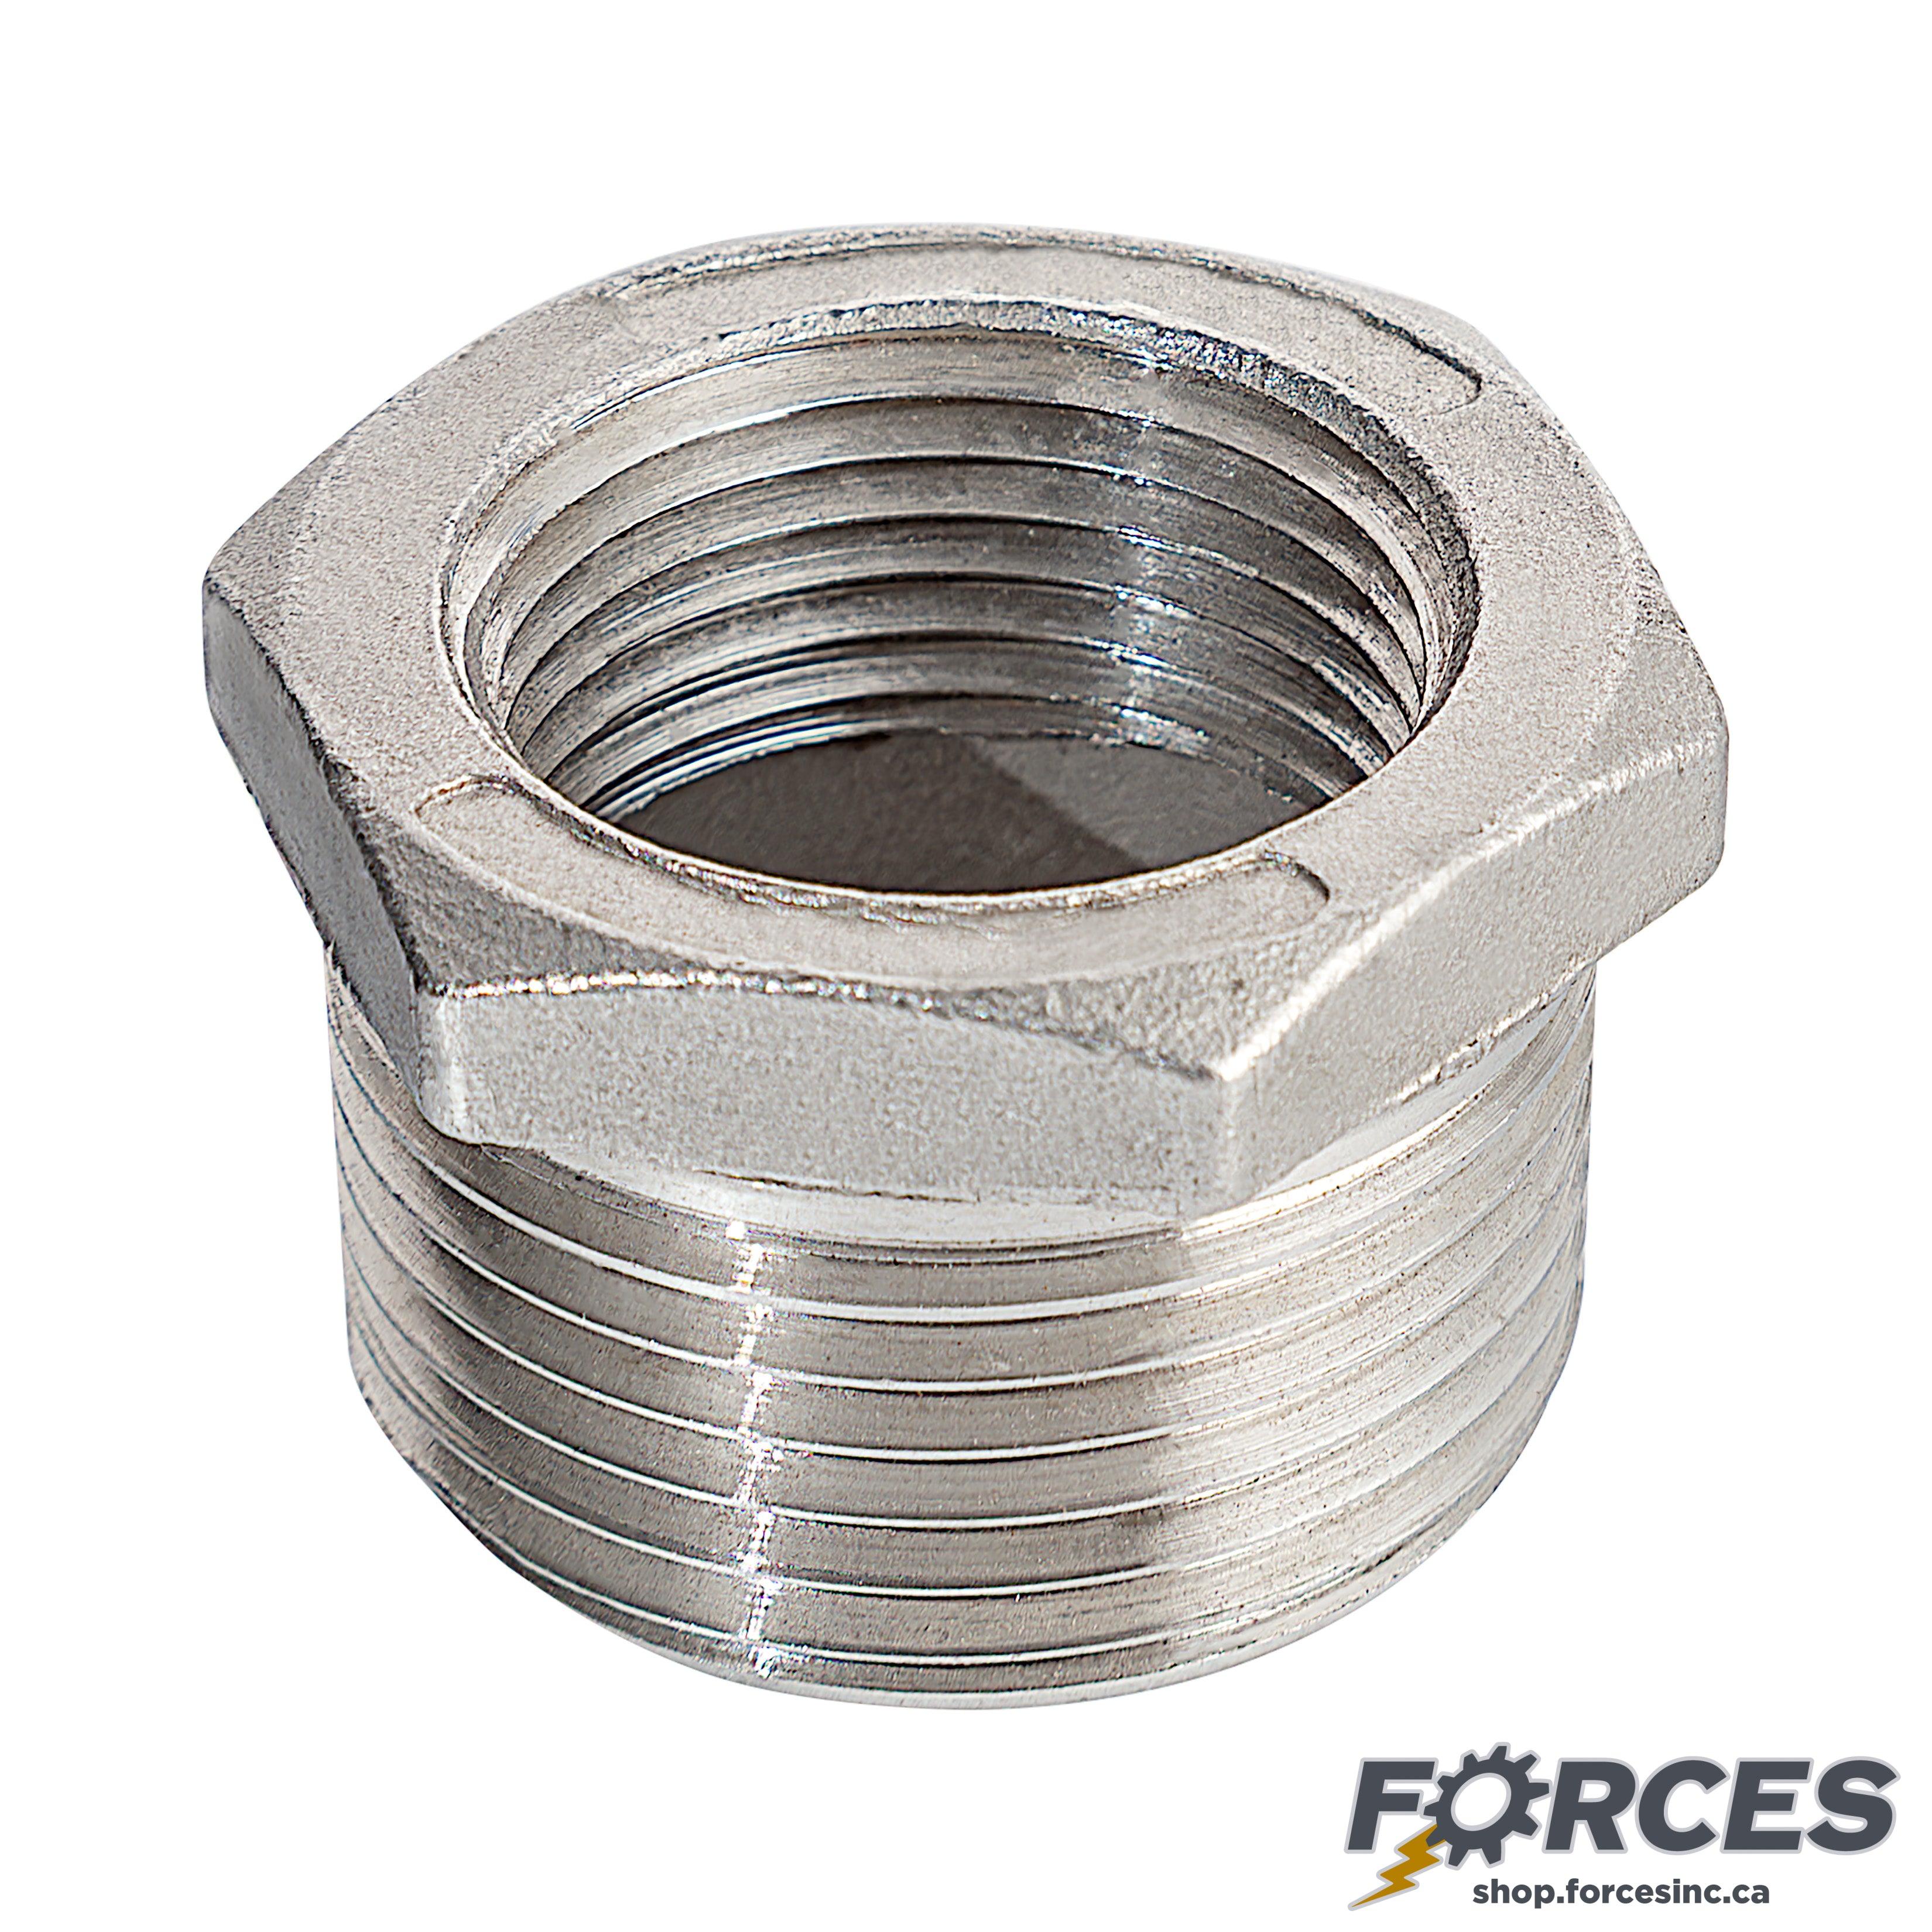 1/2" (M) x 1/8" (F) Reducing Hex Bushing NPT #150 - Stainless Steel 316 - Forces Inc